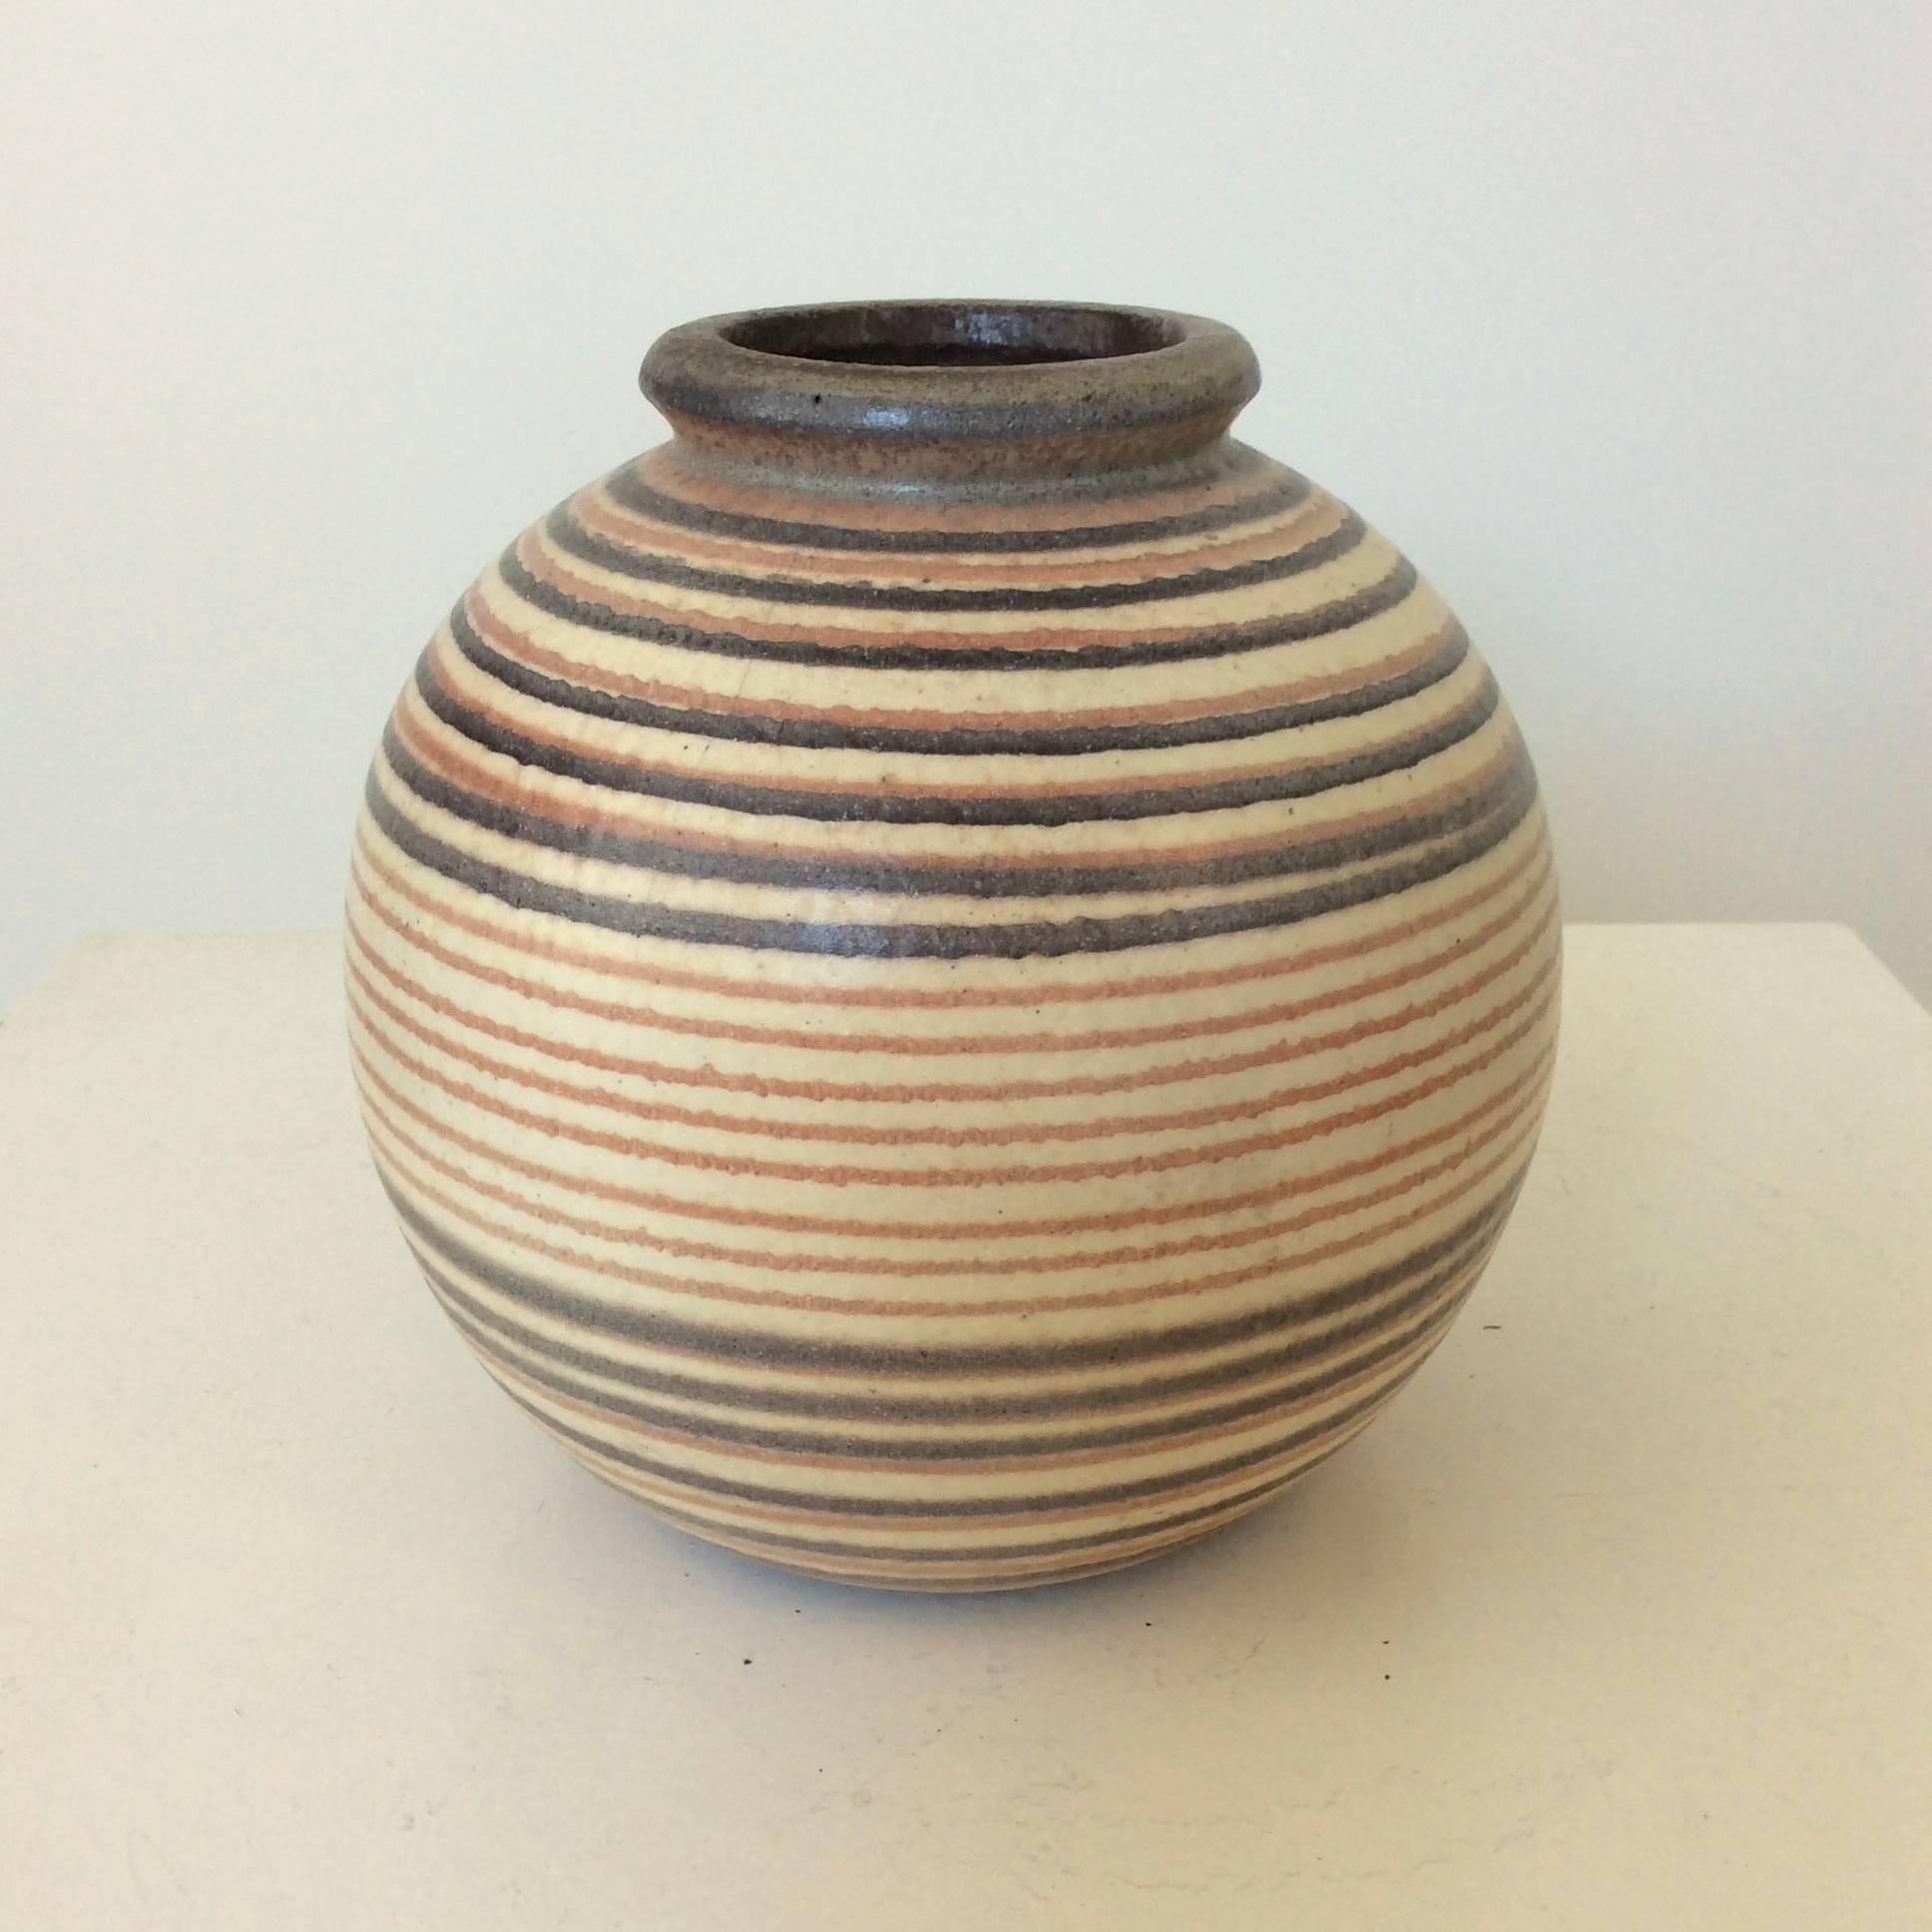 Nice striped ball vase, circa 1930. Bauhaus school.
Dimensions: 19 cm height, diameter 19 cm.
Good original condition. 
All purchases are covered by our Buyer Protection Guarantee.
This item can be returned within 7 days of delivery.
We ship